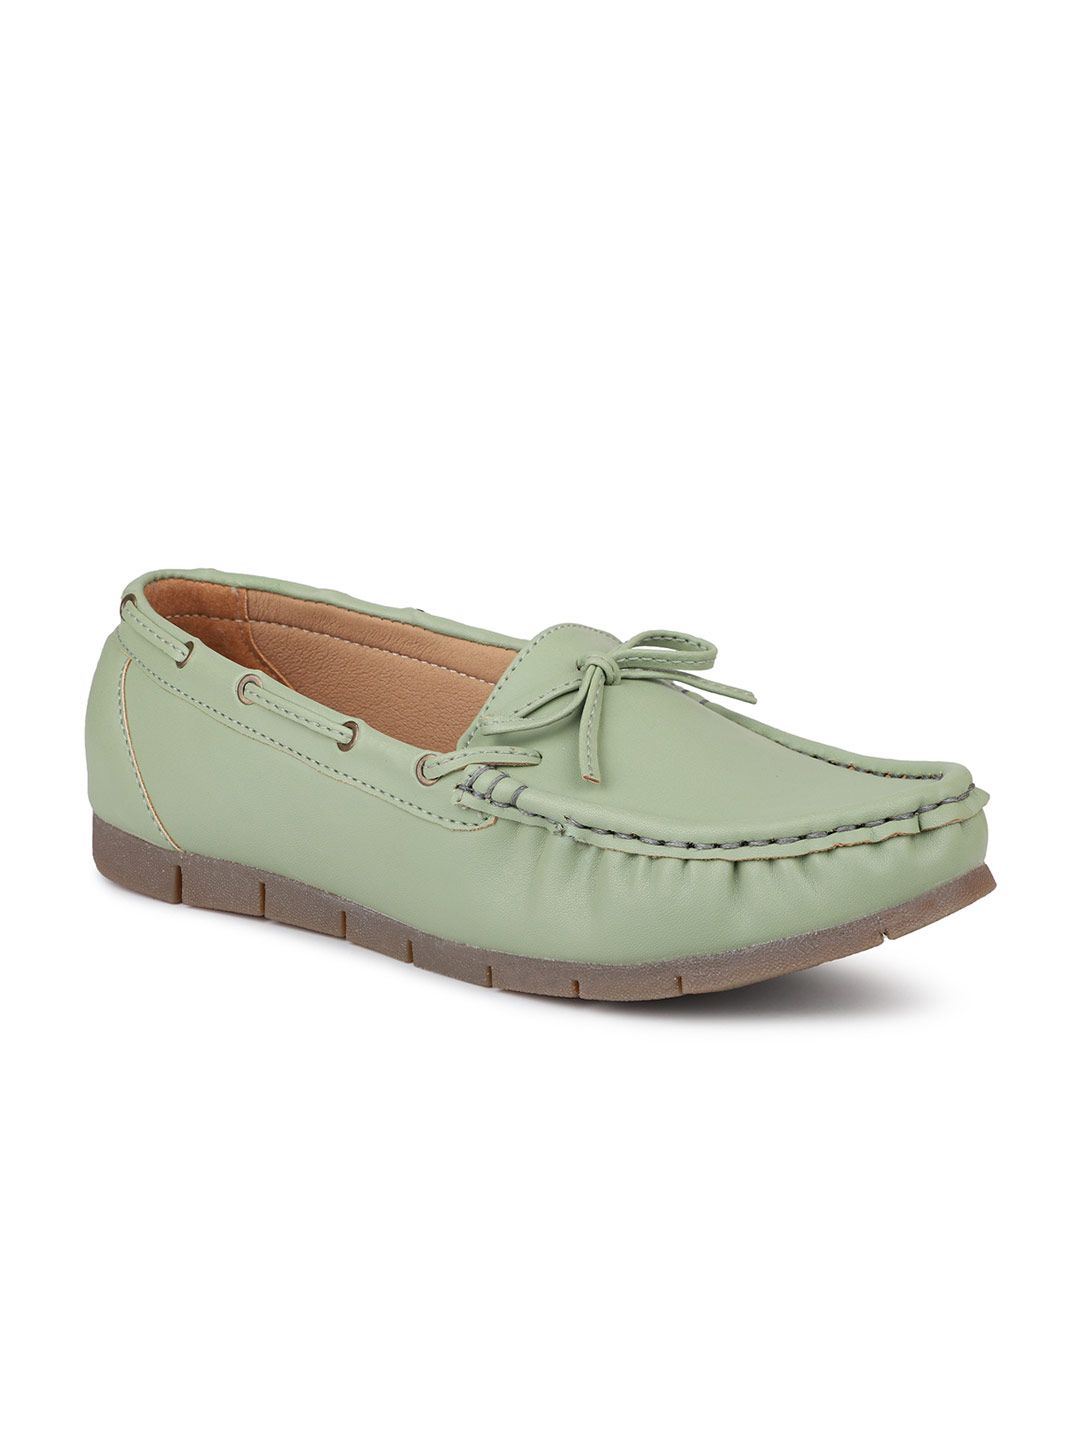 DESIGN CREW Women Green Bow Embellished Boat Shoes Price in India